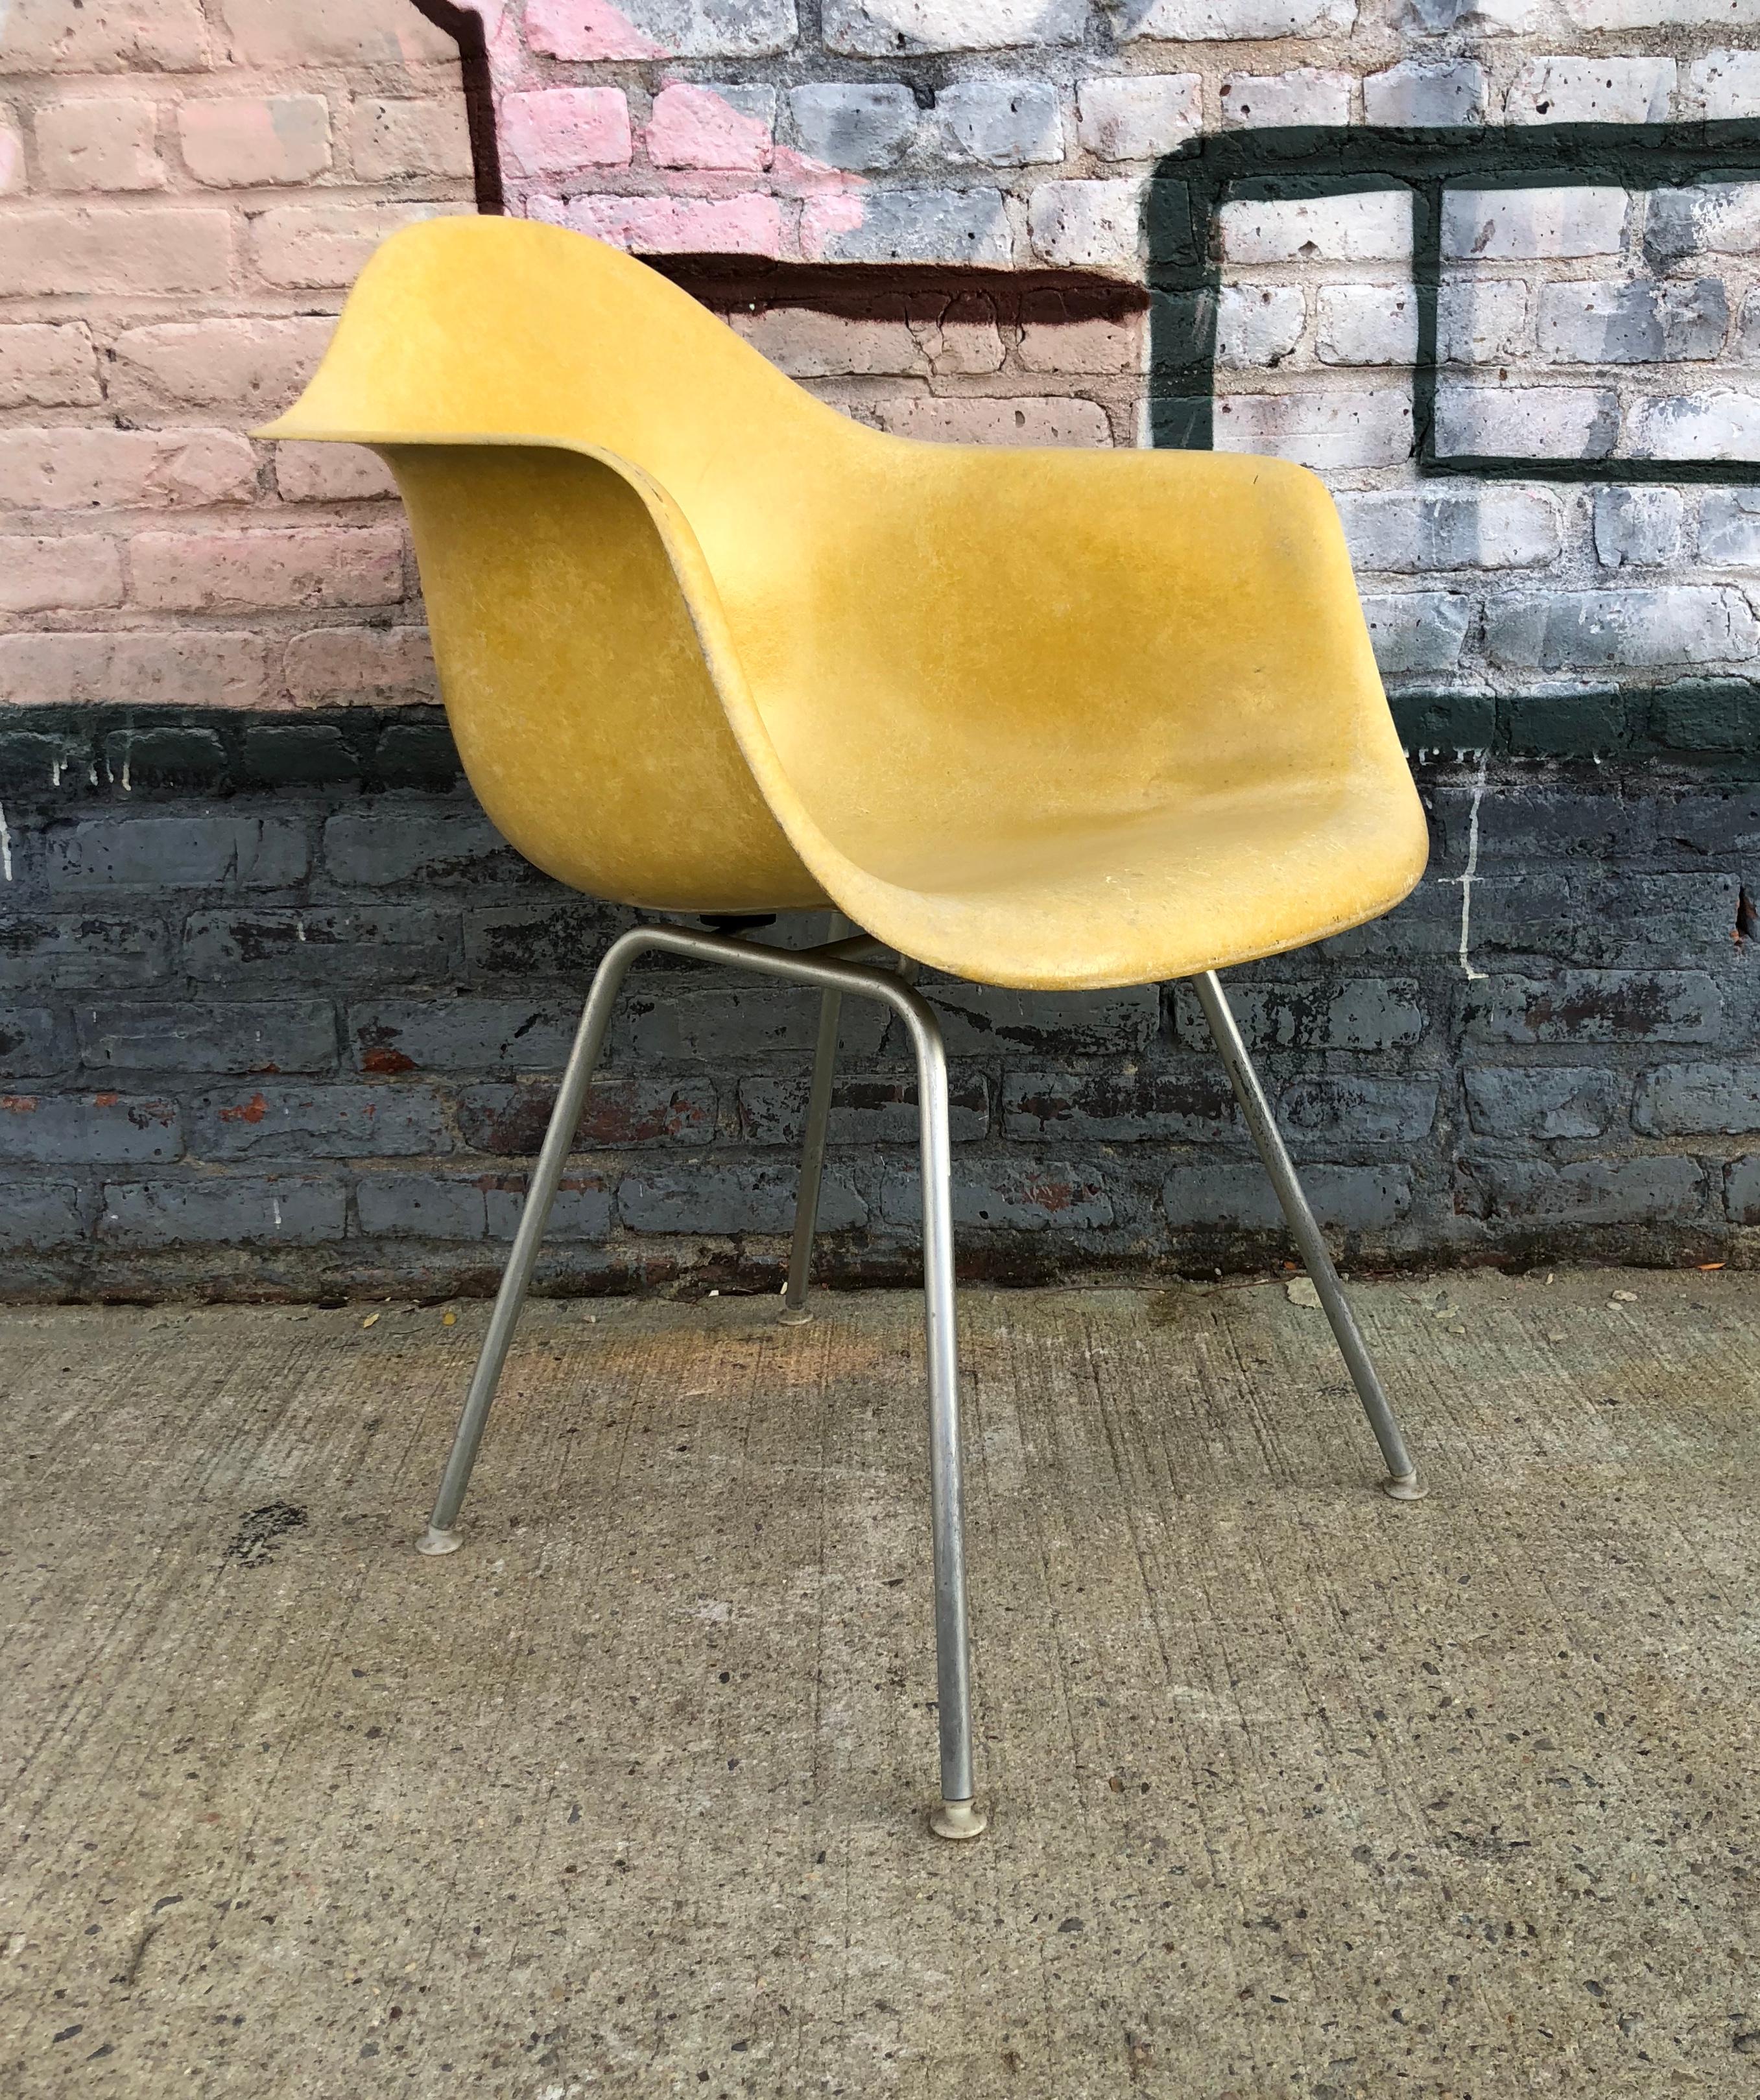 Herman Miller Eames DAX armchair in brilliant yellow, a rare color option. Chair in good vintage condition with all mount and glides intact. No cracks, circa 1960s.